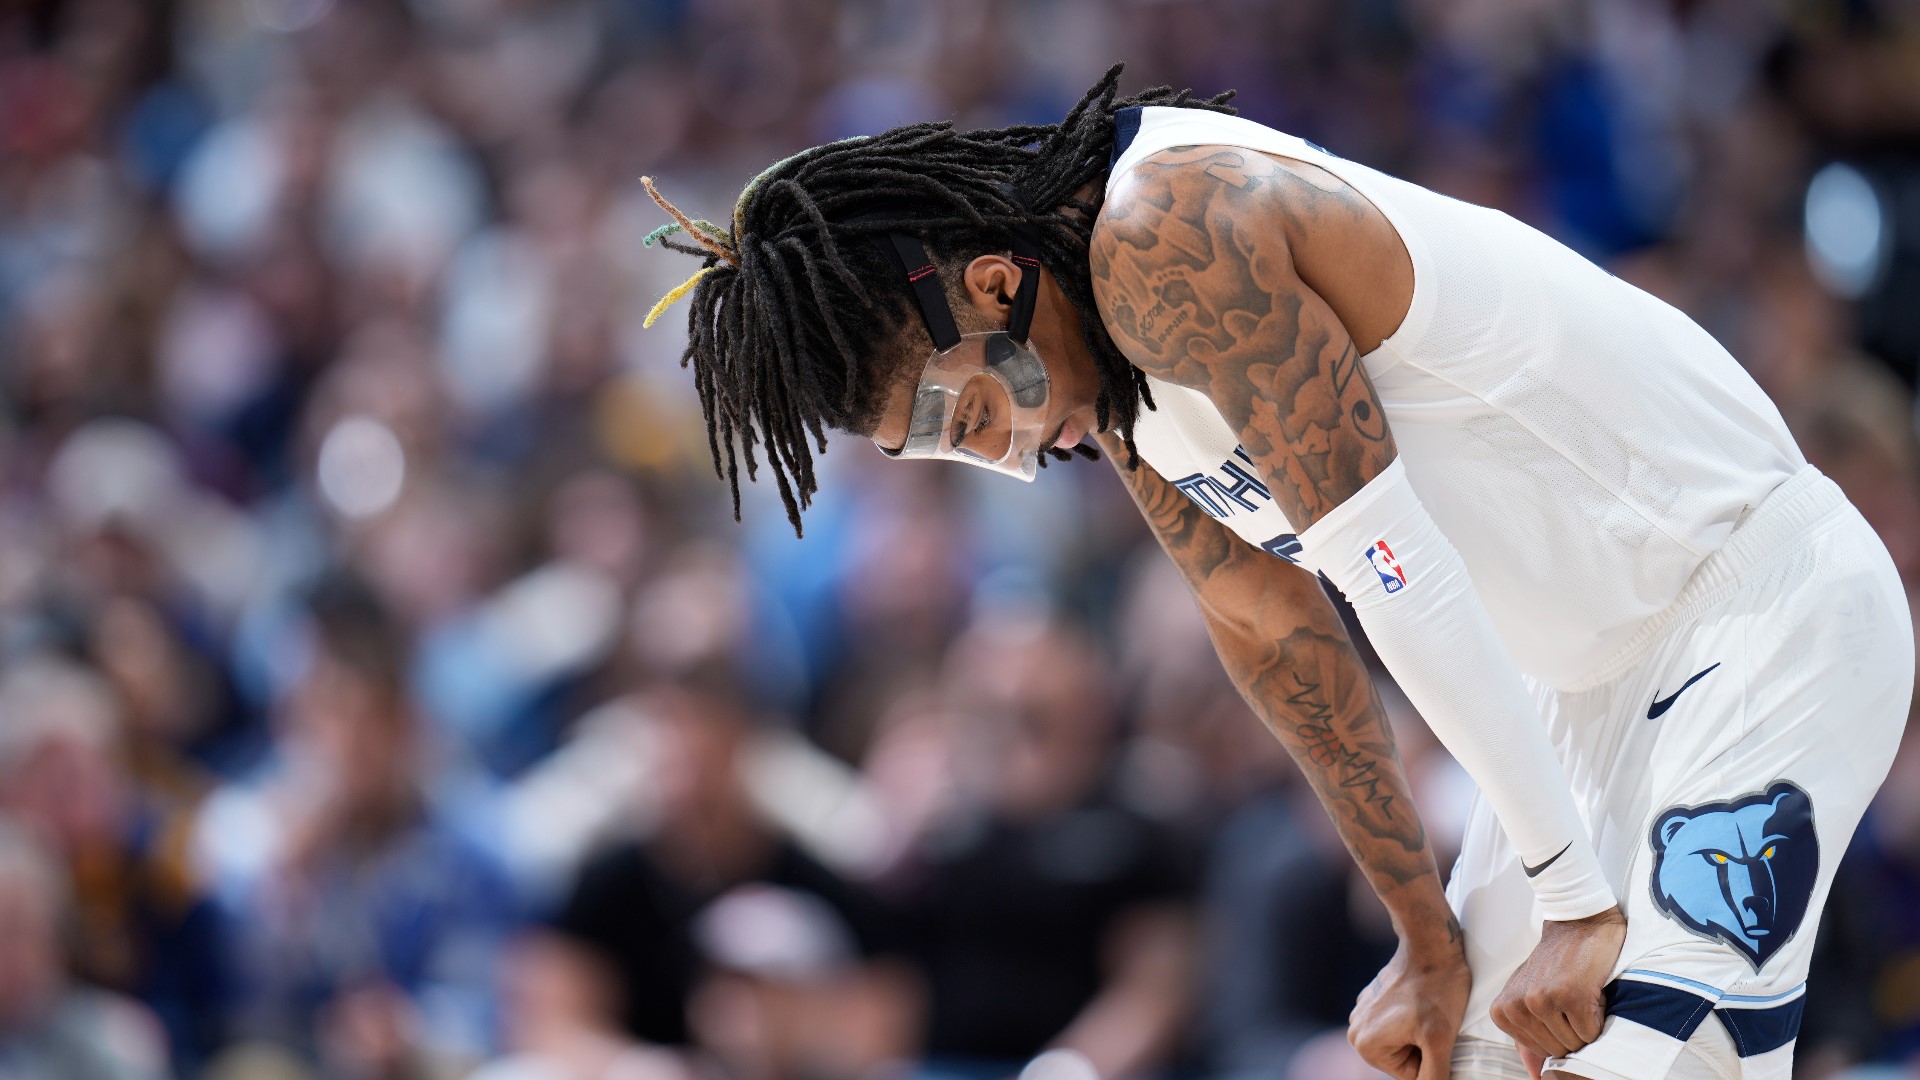 Lawyers for Memphis Grizzlies guard Ja Morant are allowed to argue that he was acting in self-defense as part of a lawsuit accusing him of assaulting a teenager.